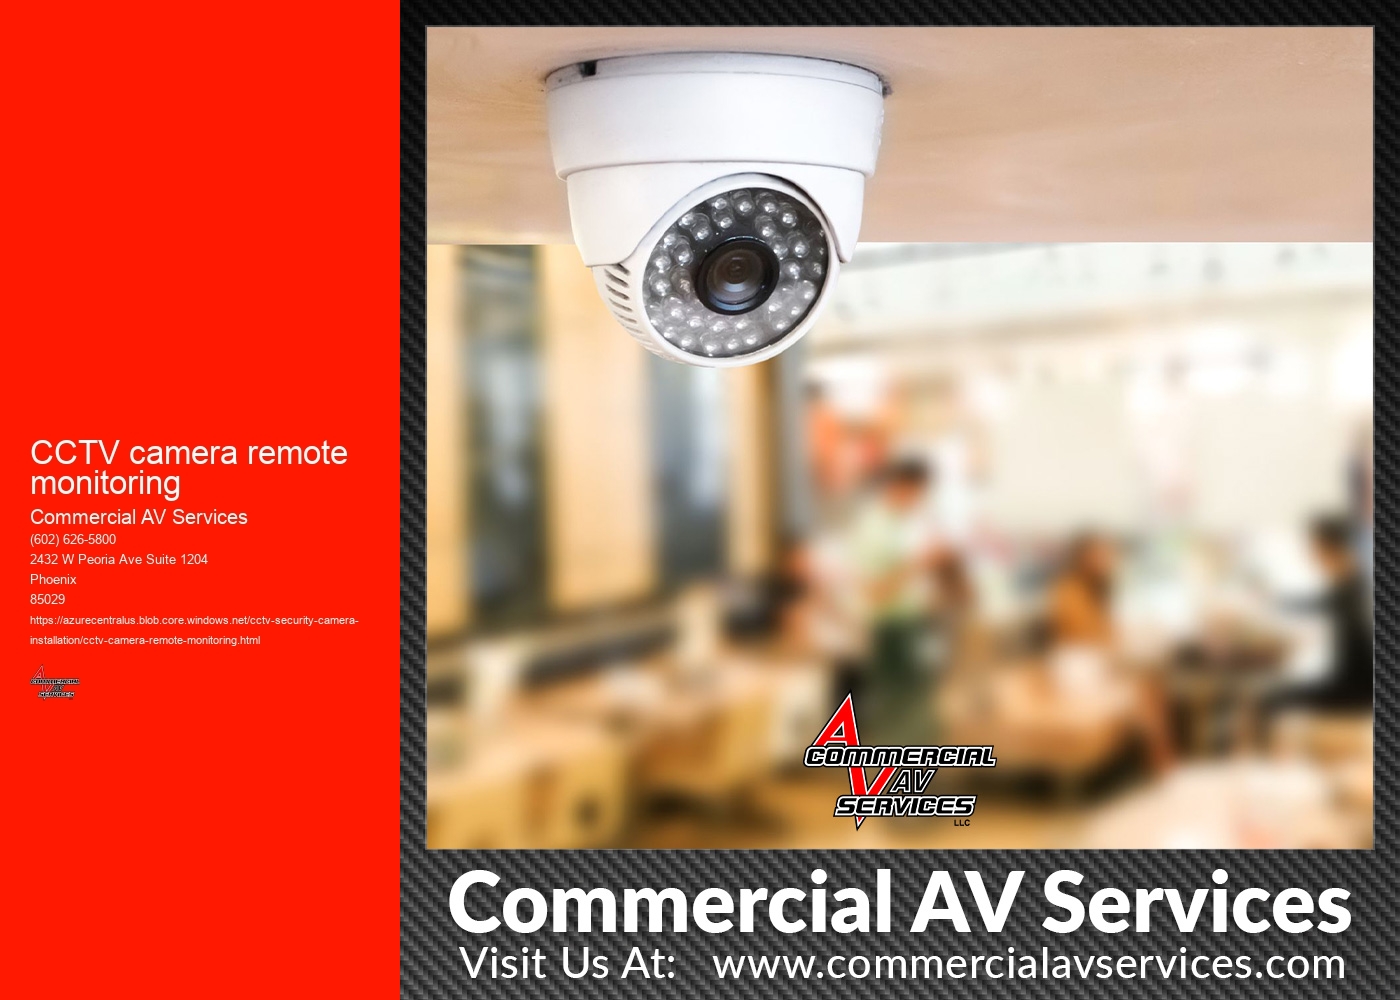 What are the bandwidth and data usage considerations for remote monitoring of CCTV cameras?